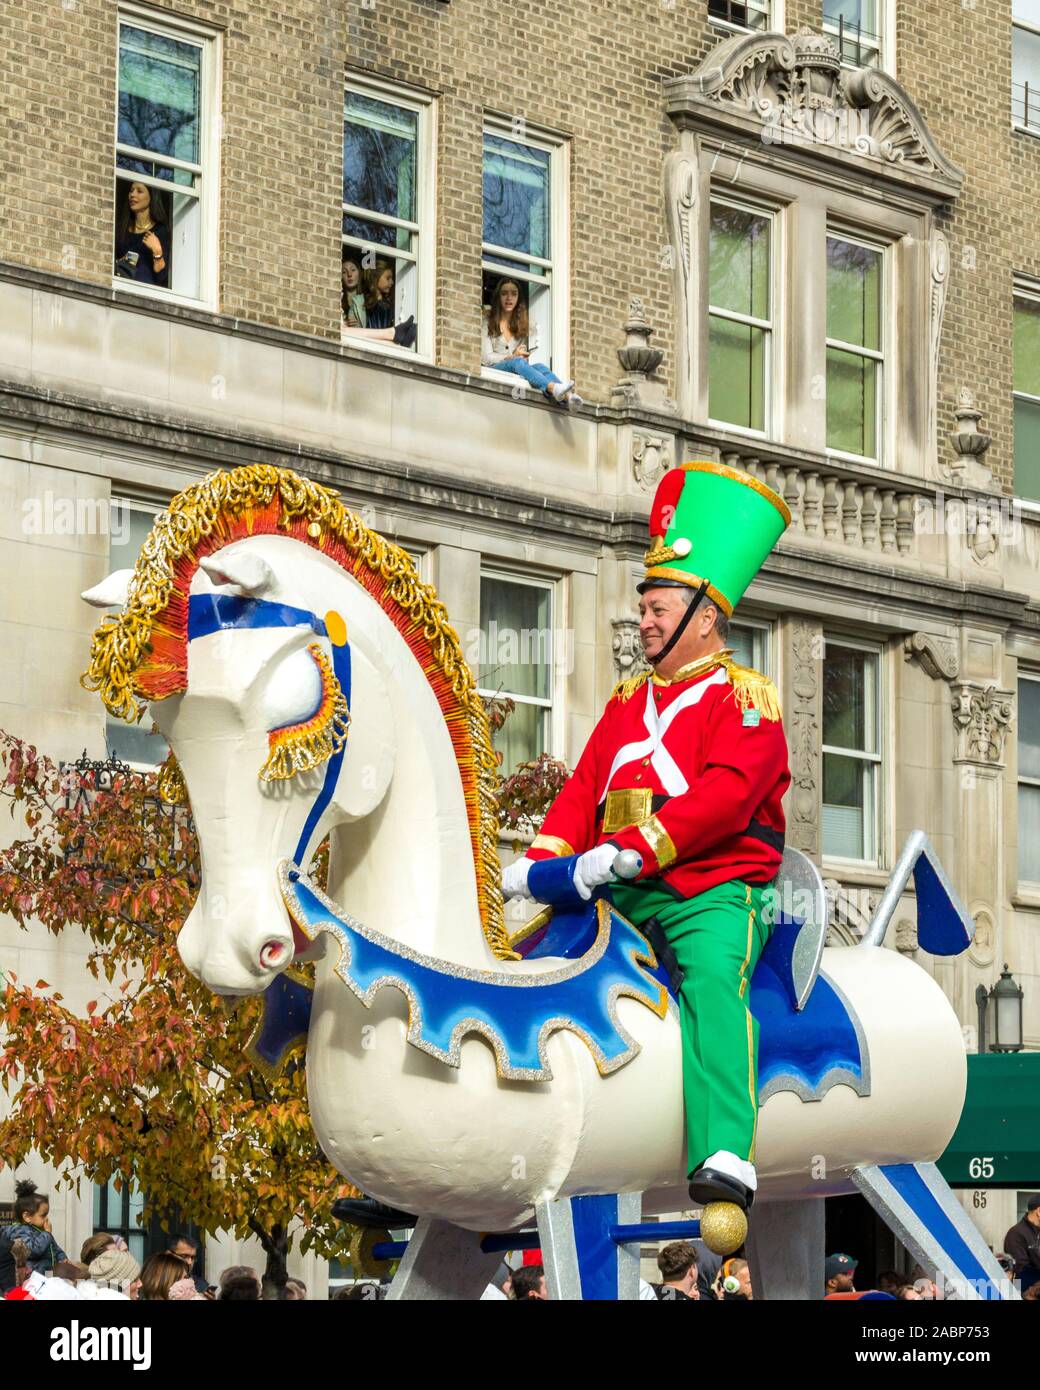 New York, USA. 28th Nov, 2019. People watch the Rocking Horse float from their building in Central Park West during Macy's Thanksgiving Parade in New York City. Credit: Enrique Shore/Alamy Live News Stock Photo